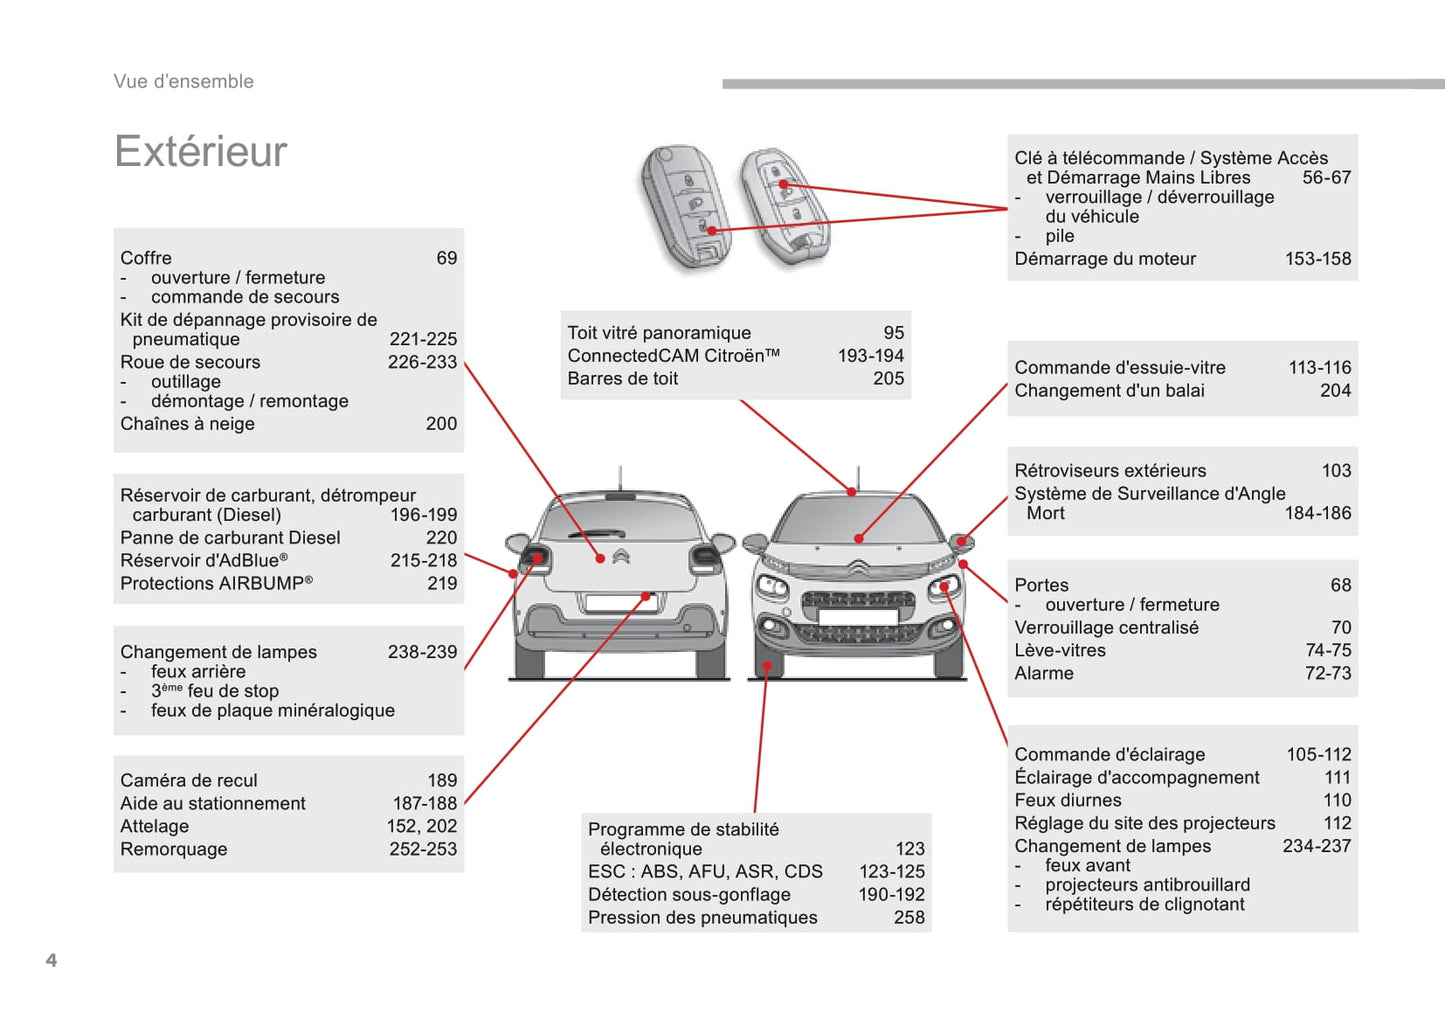 2016-2017 Citroën C3 Owner's Manual | French